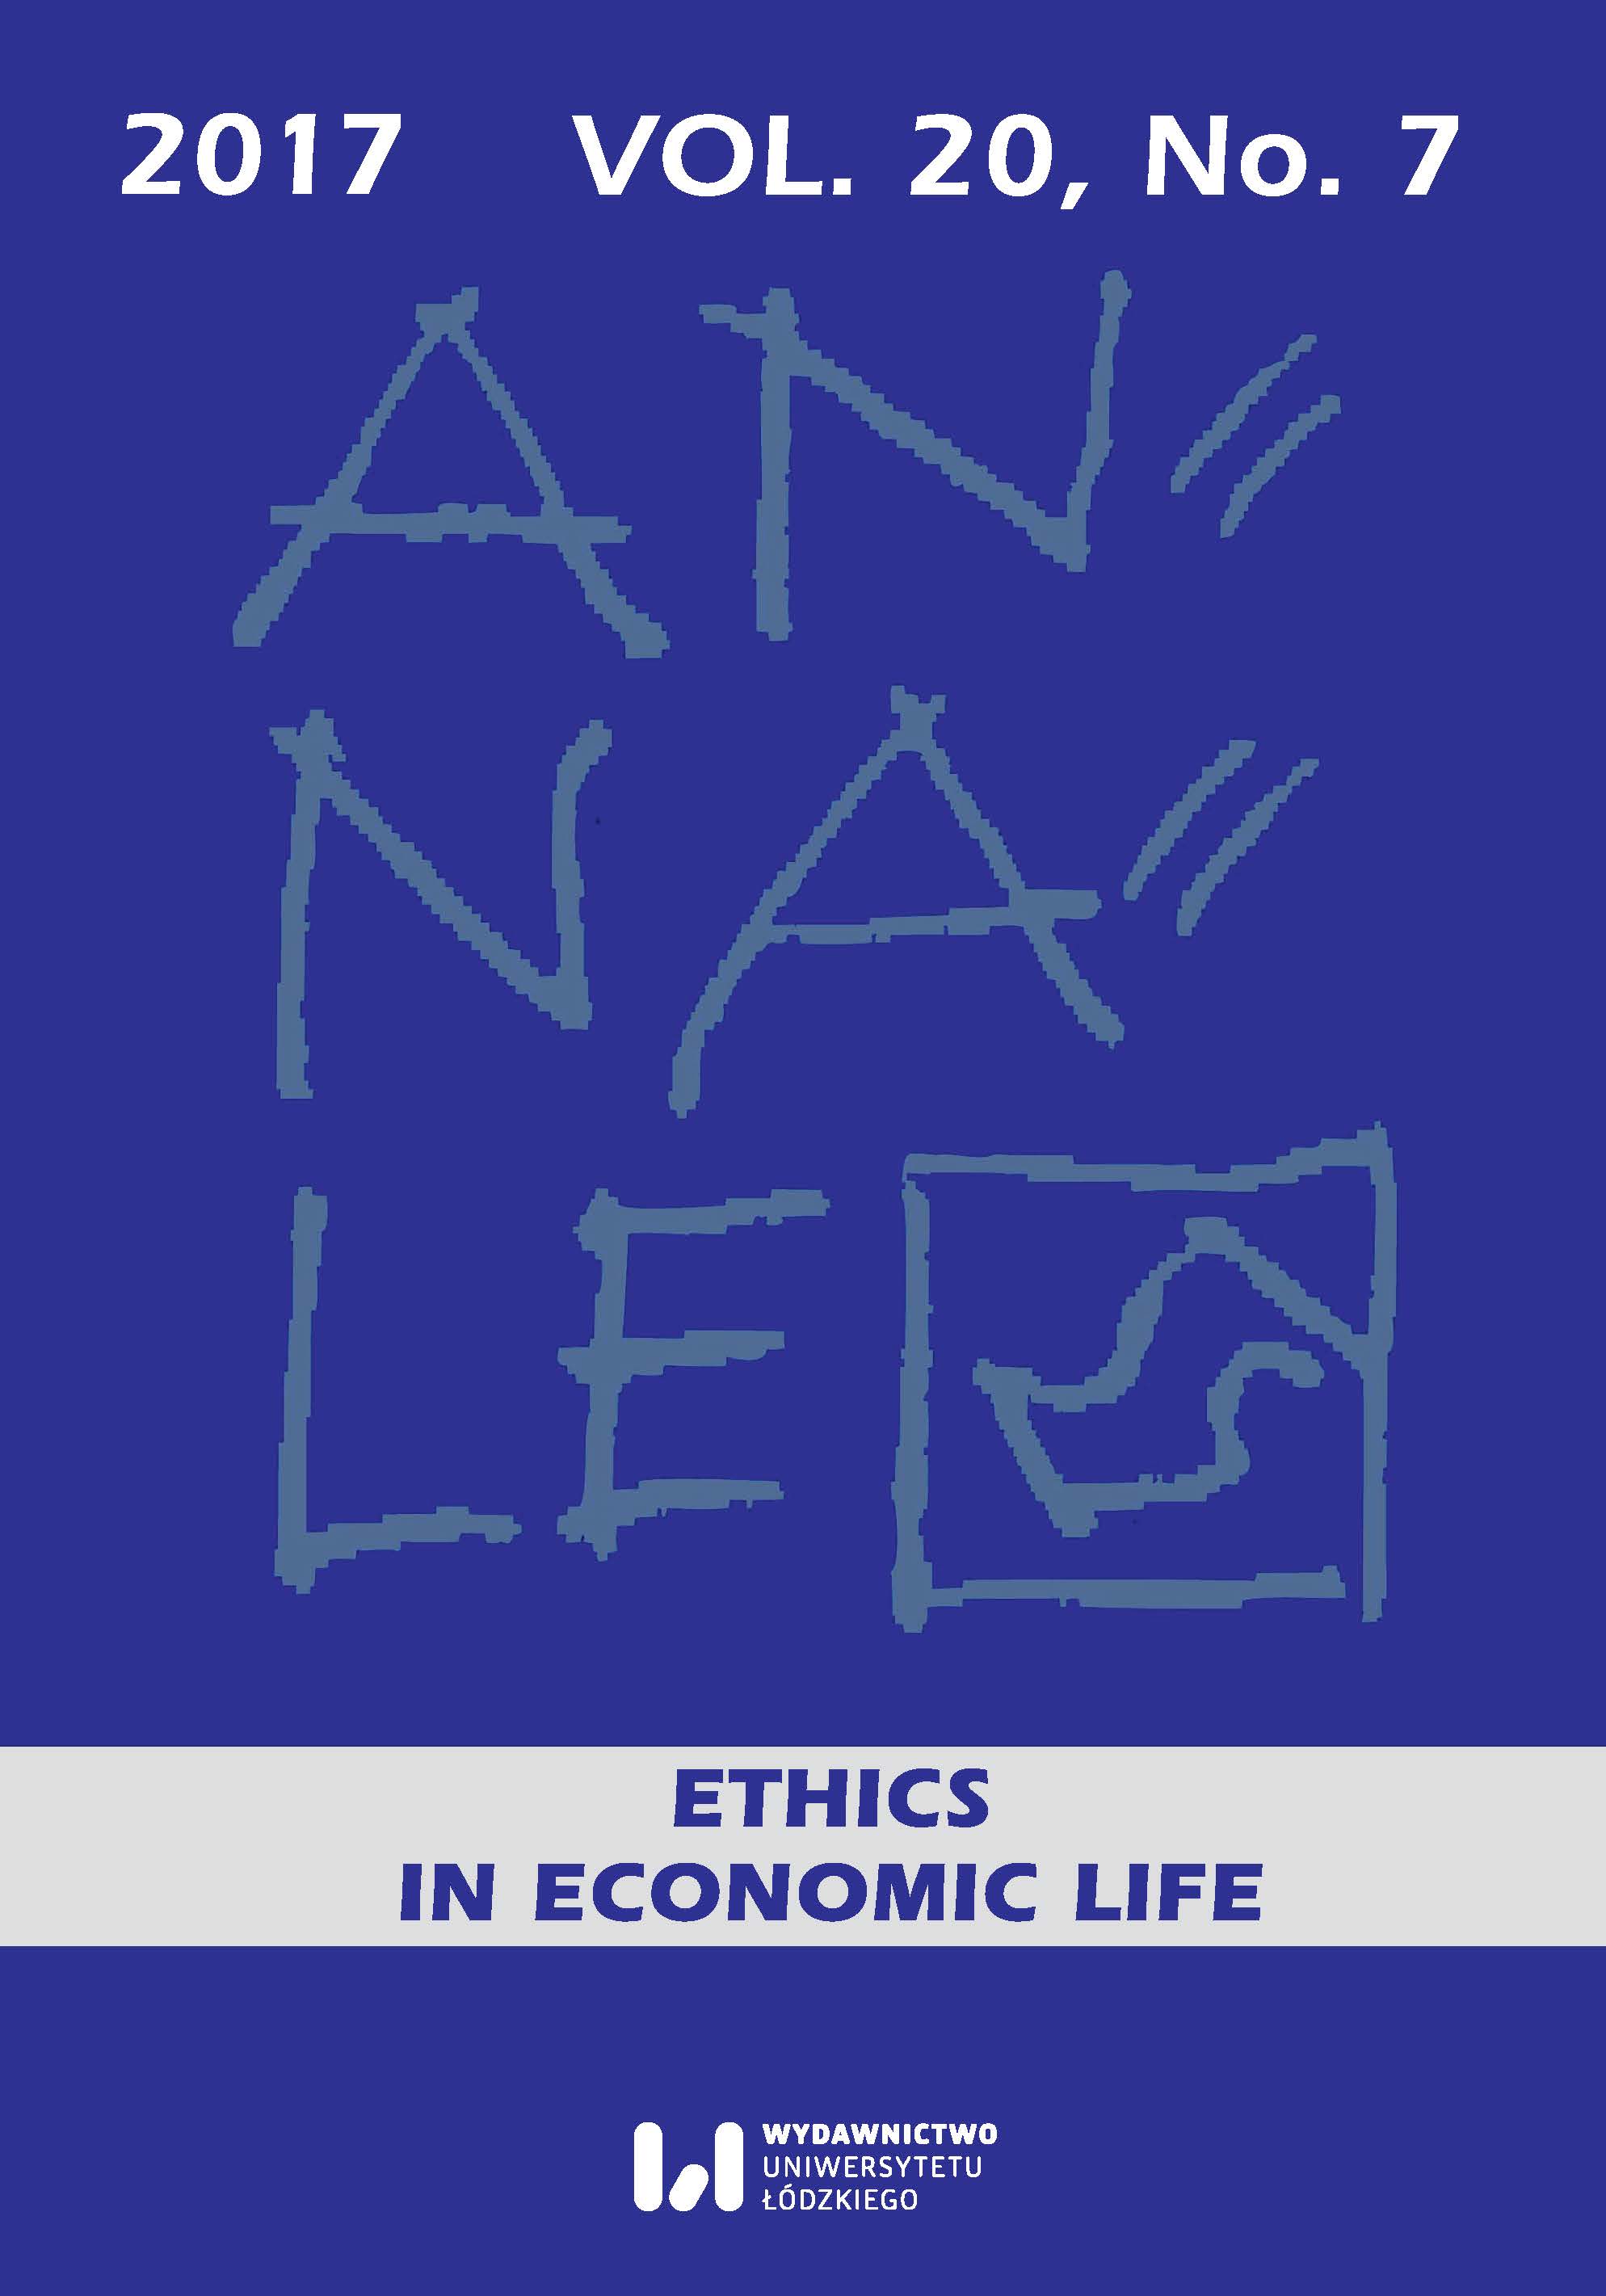 The ethical and praxeological conceptions of an act and its evaluation